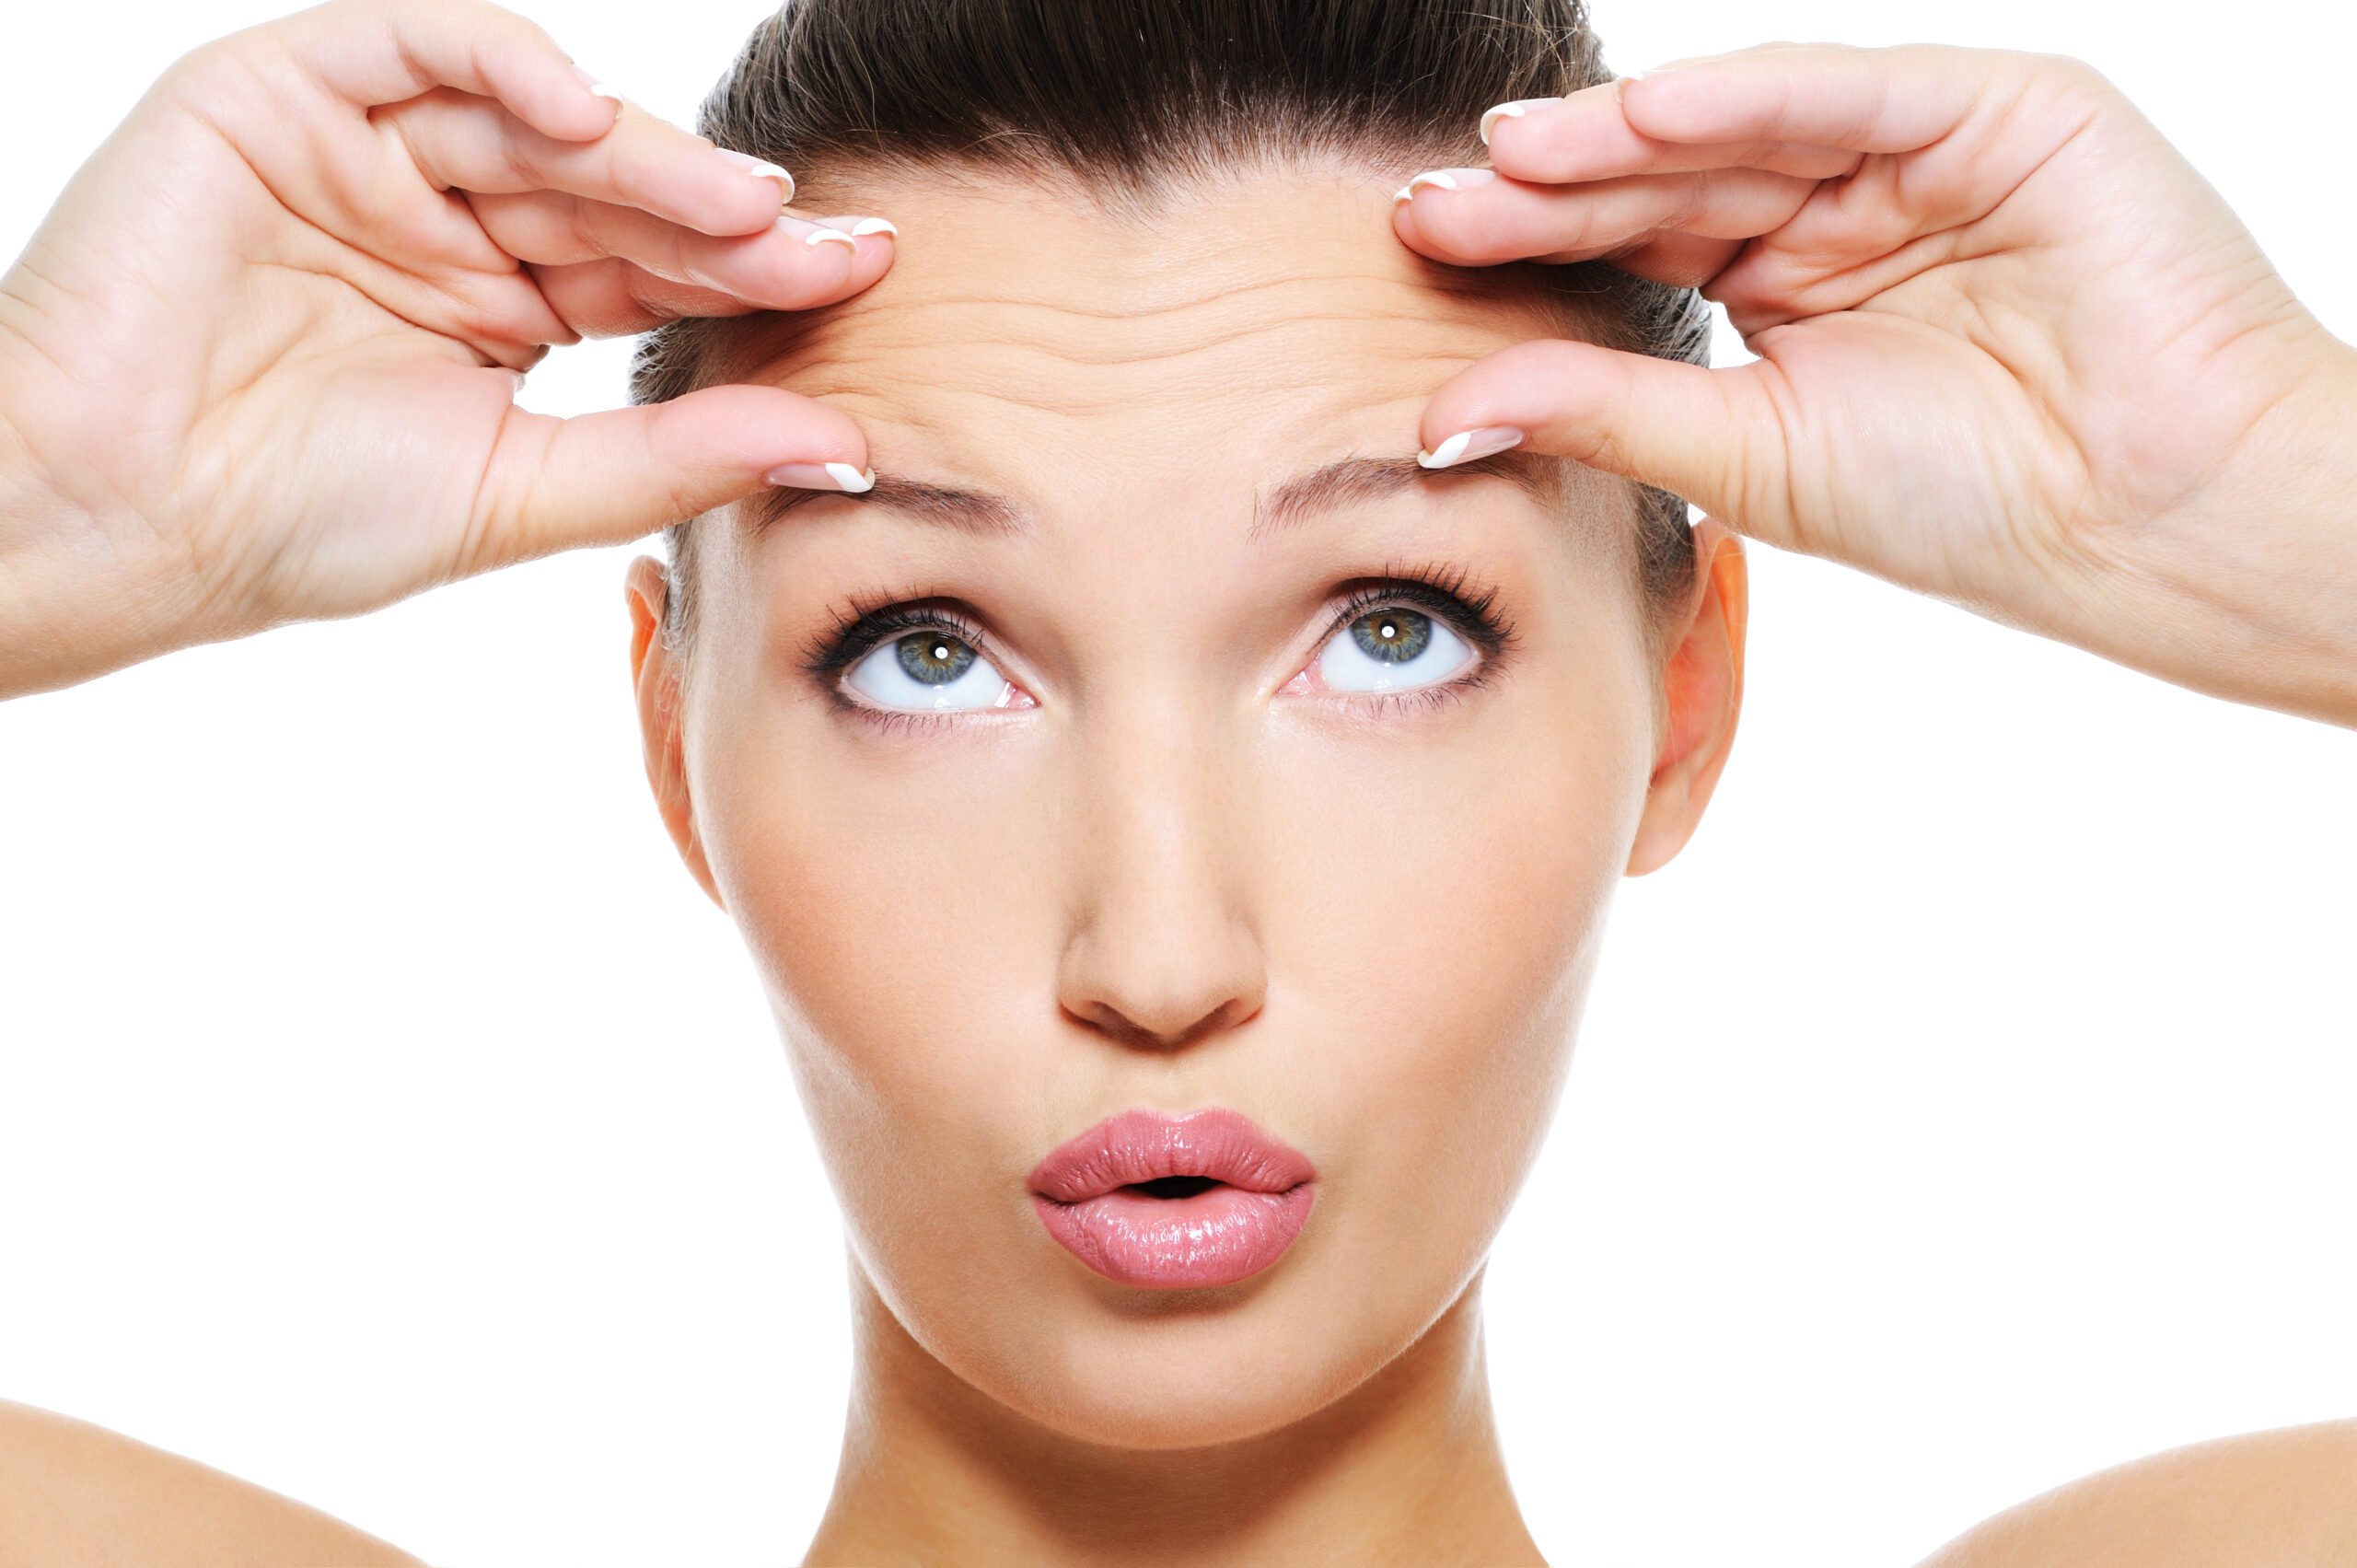 A Woman touching on wrinkles in her forehead | Get treatment for Wrinkles at Beauty Boost Med Spa in Newport Beach, CA